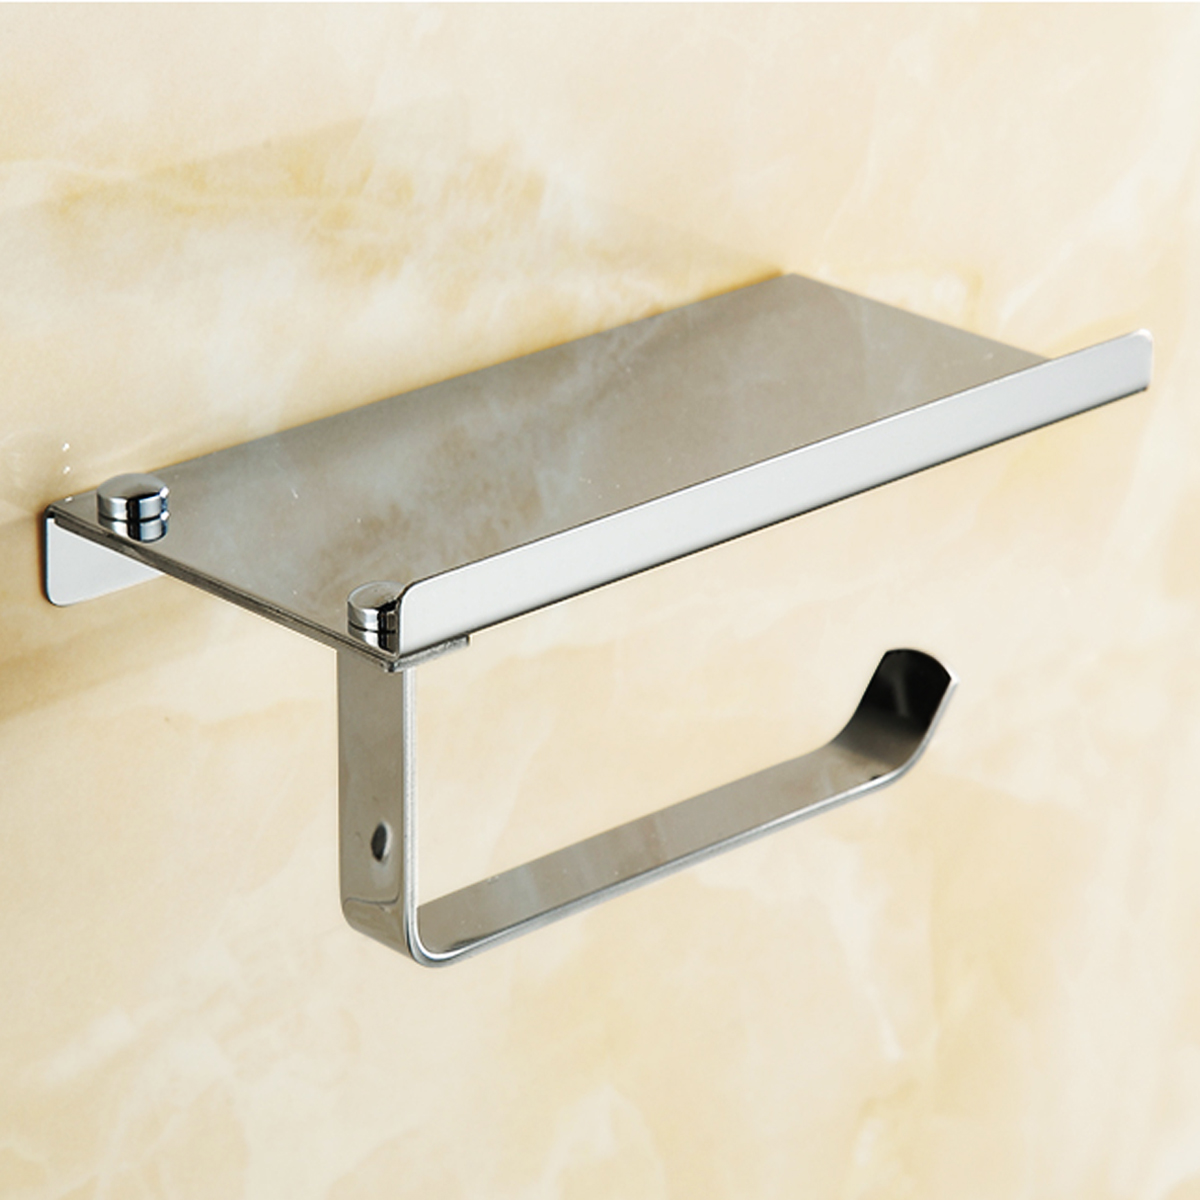 Stainless-Steel-Toilet-Roll-Tissue-Stand-Paper-Holder-Wall-Mounted-for-Home-Bathroom-Paper-Hook-1256427-6